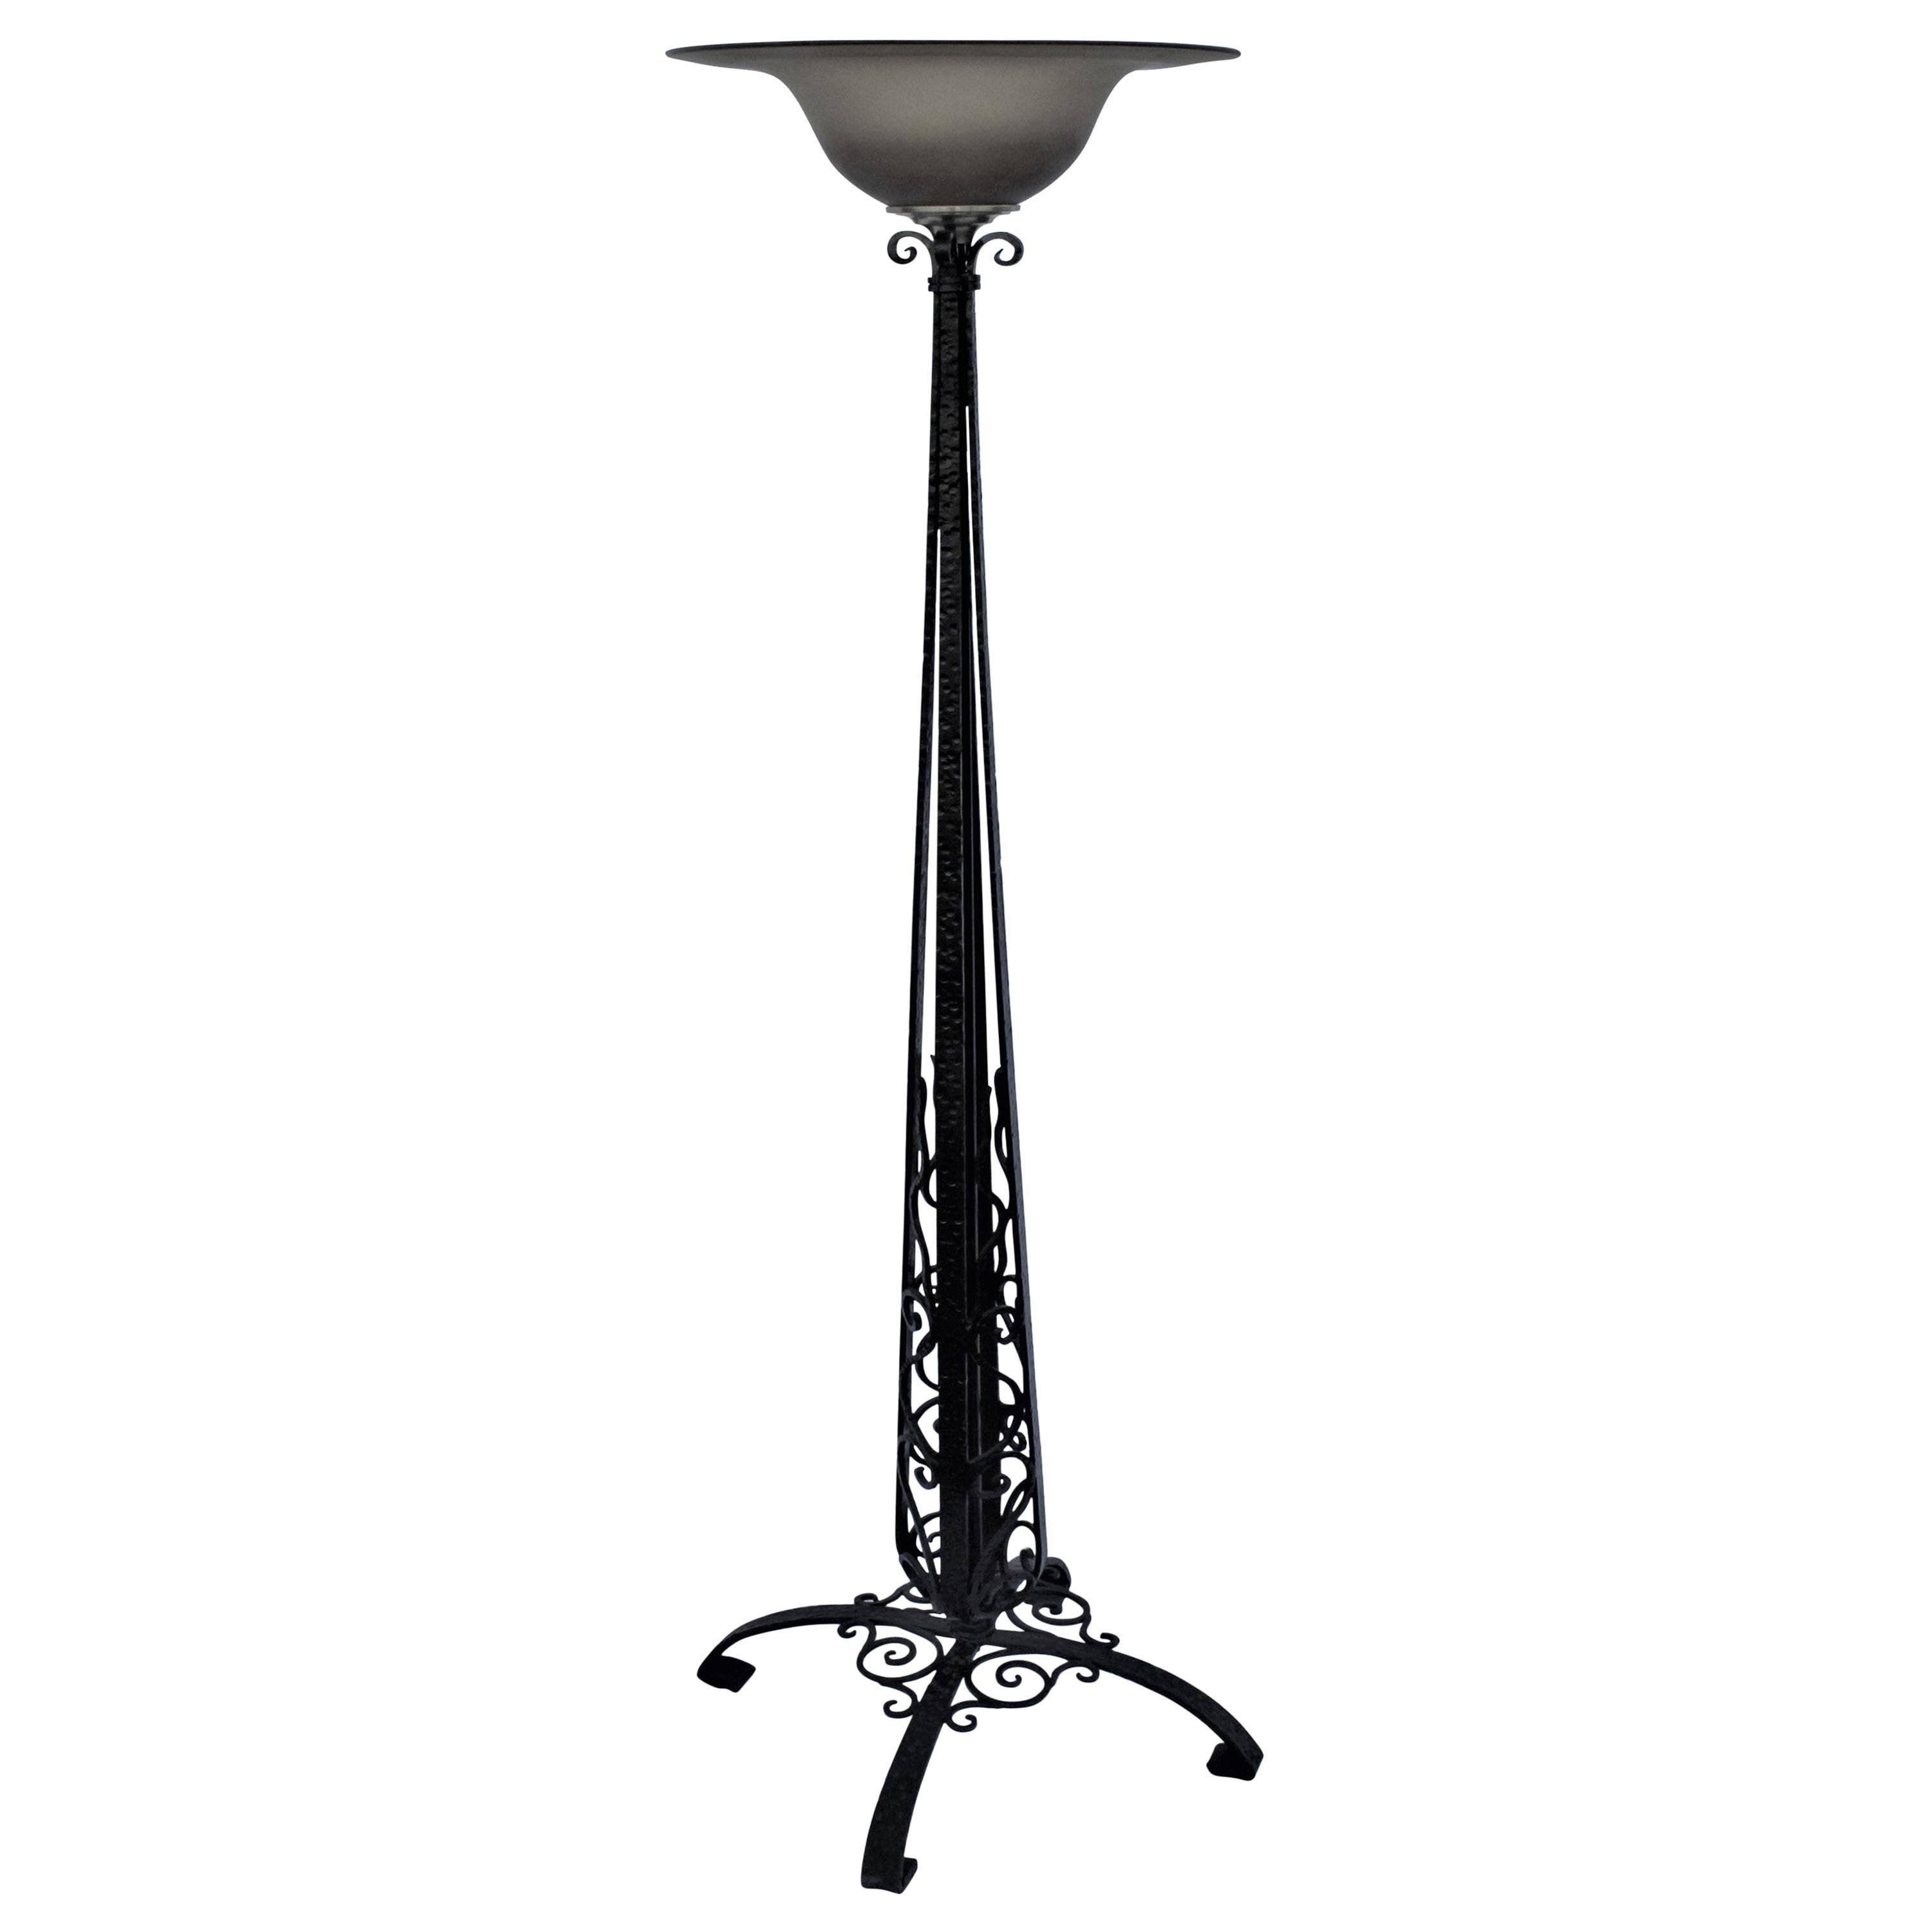 Art Deco/Modern Design Floor Lamp, Hand Forged, Amber Glass Shade Painted Black For Sale